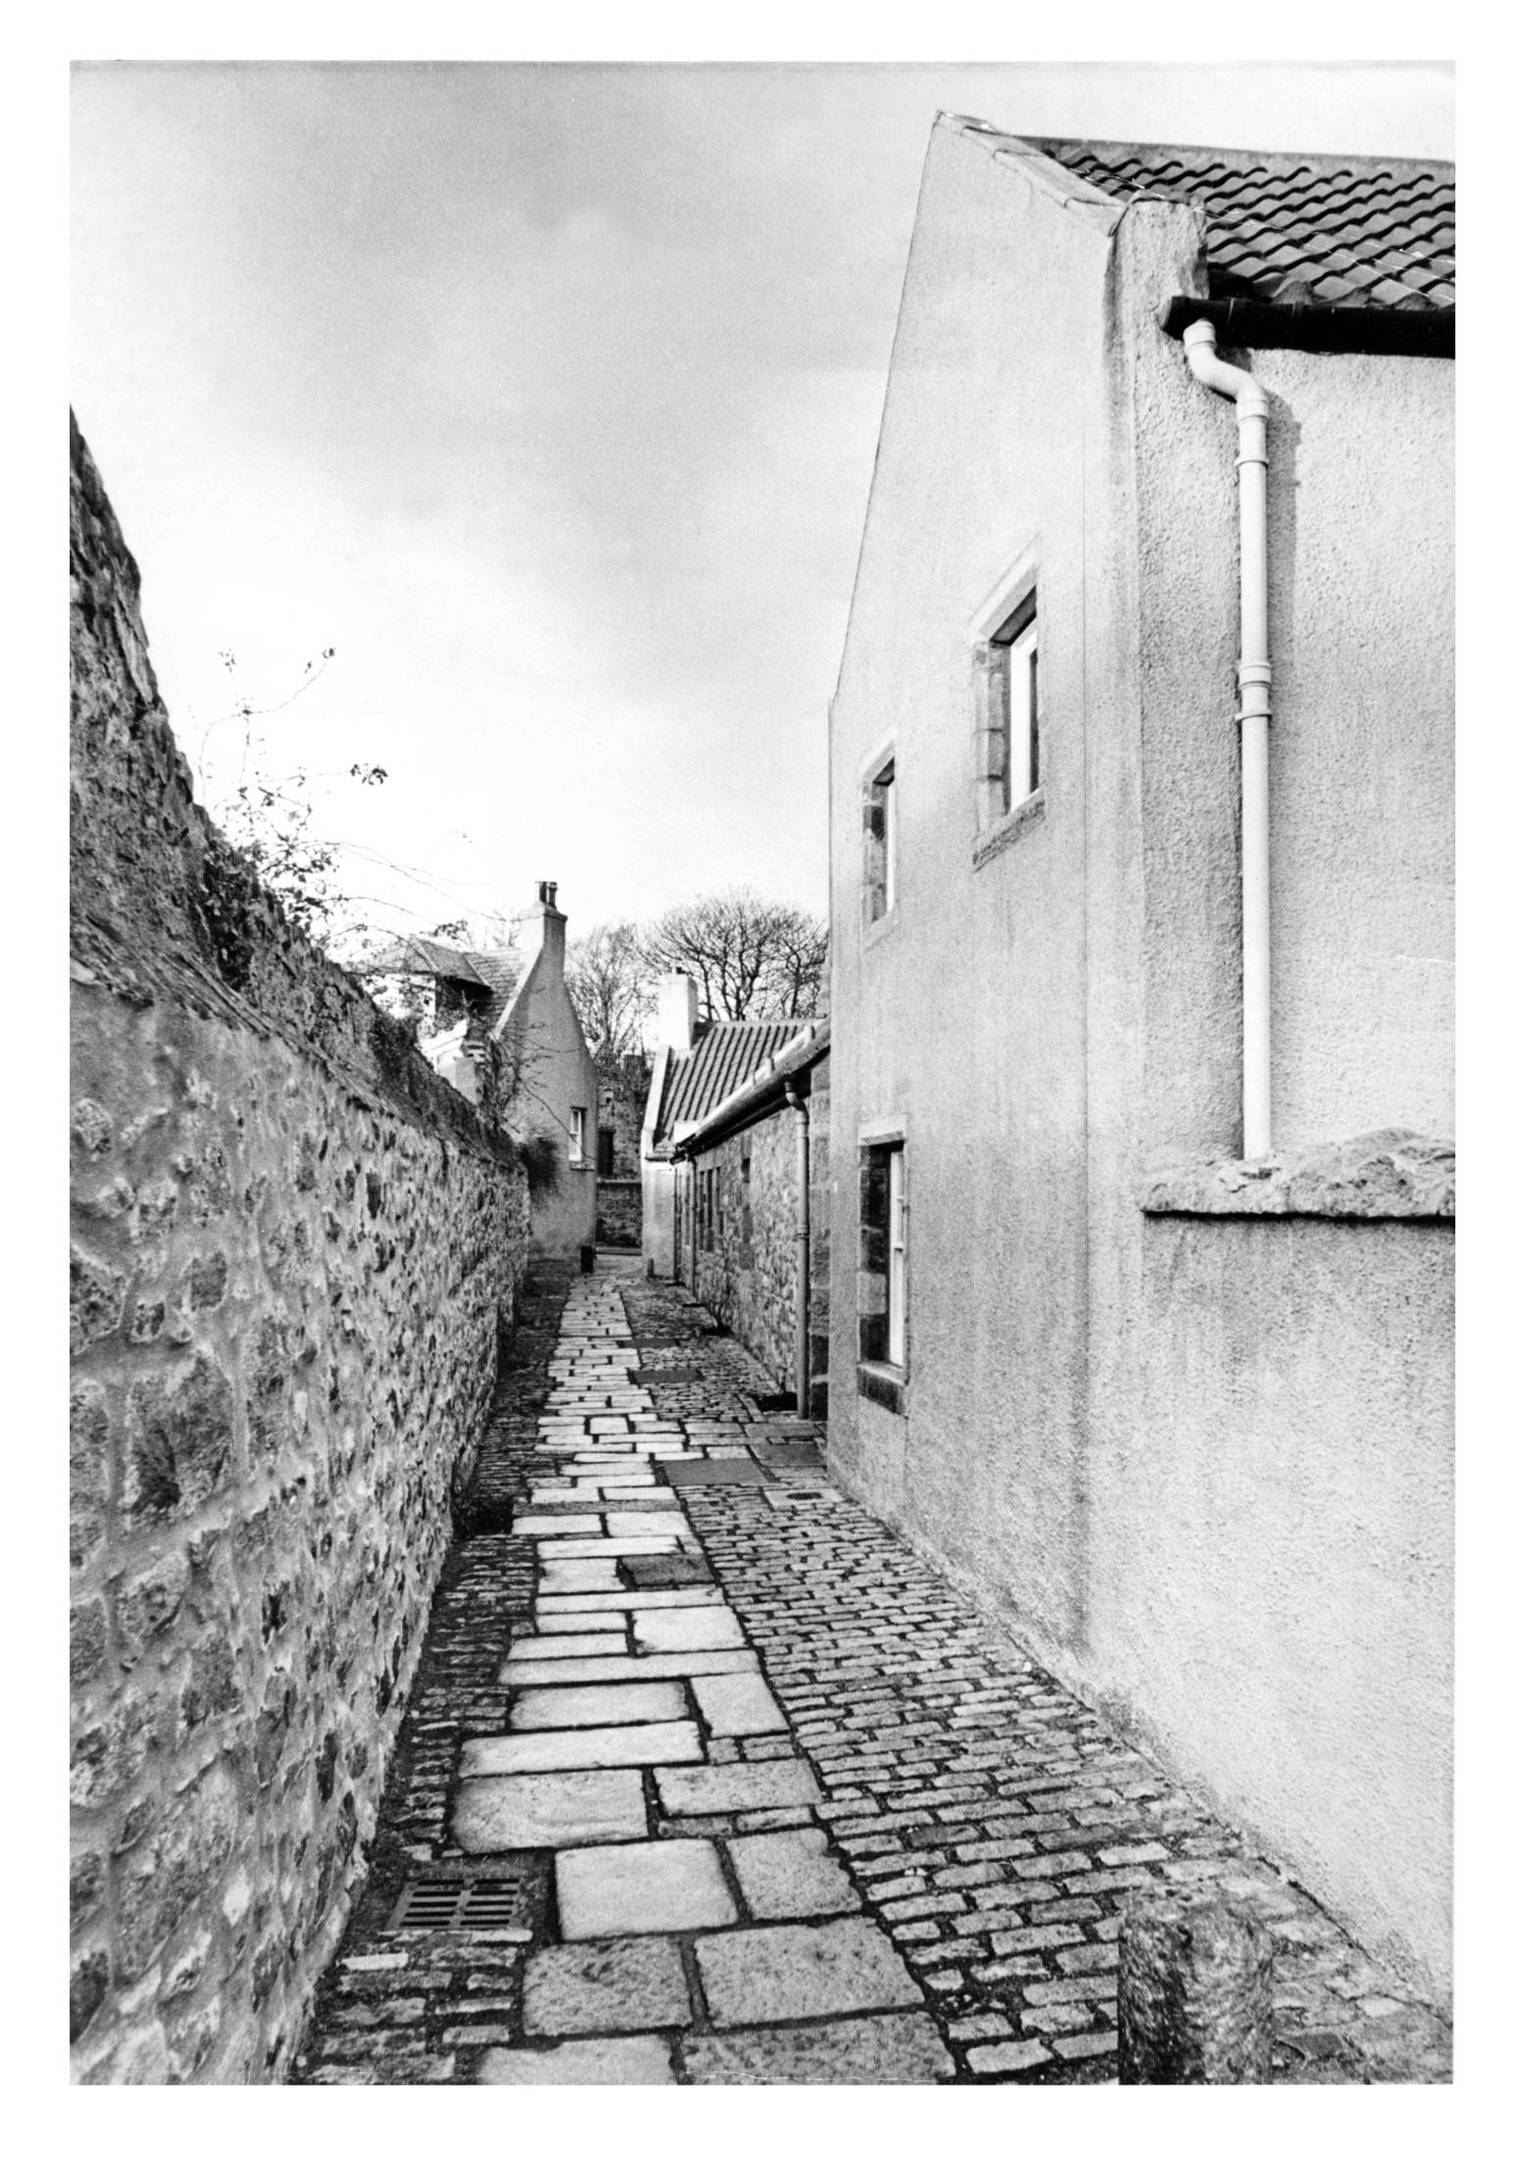 1971: The then newly refurbished Clark's Lane between Don Street and Dunbar Street.